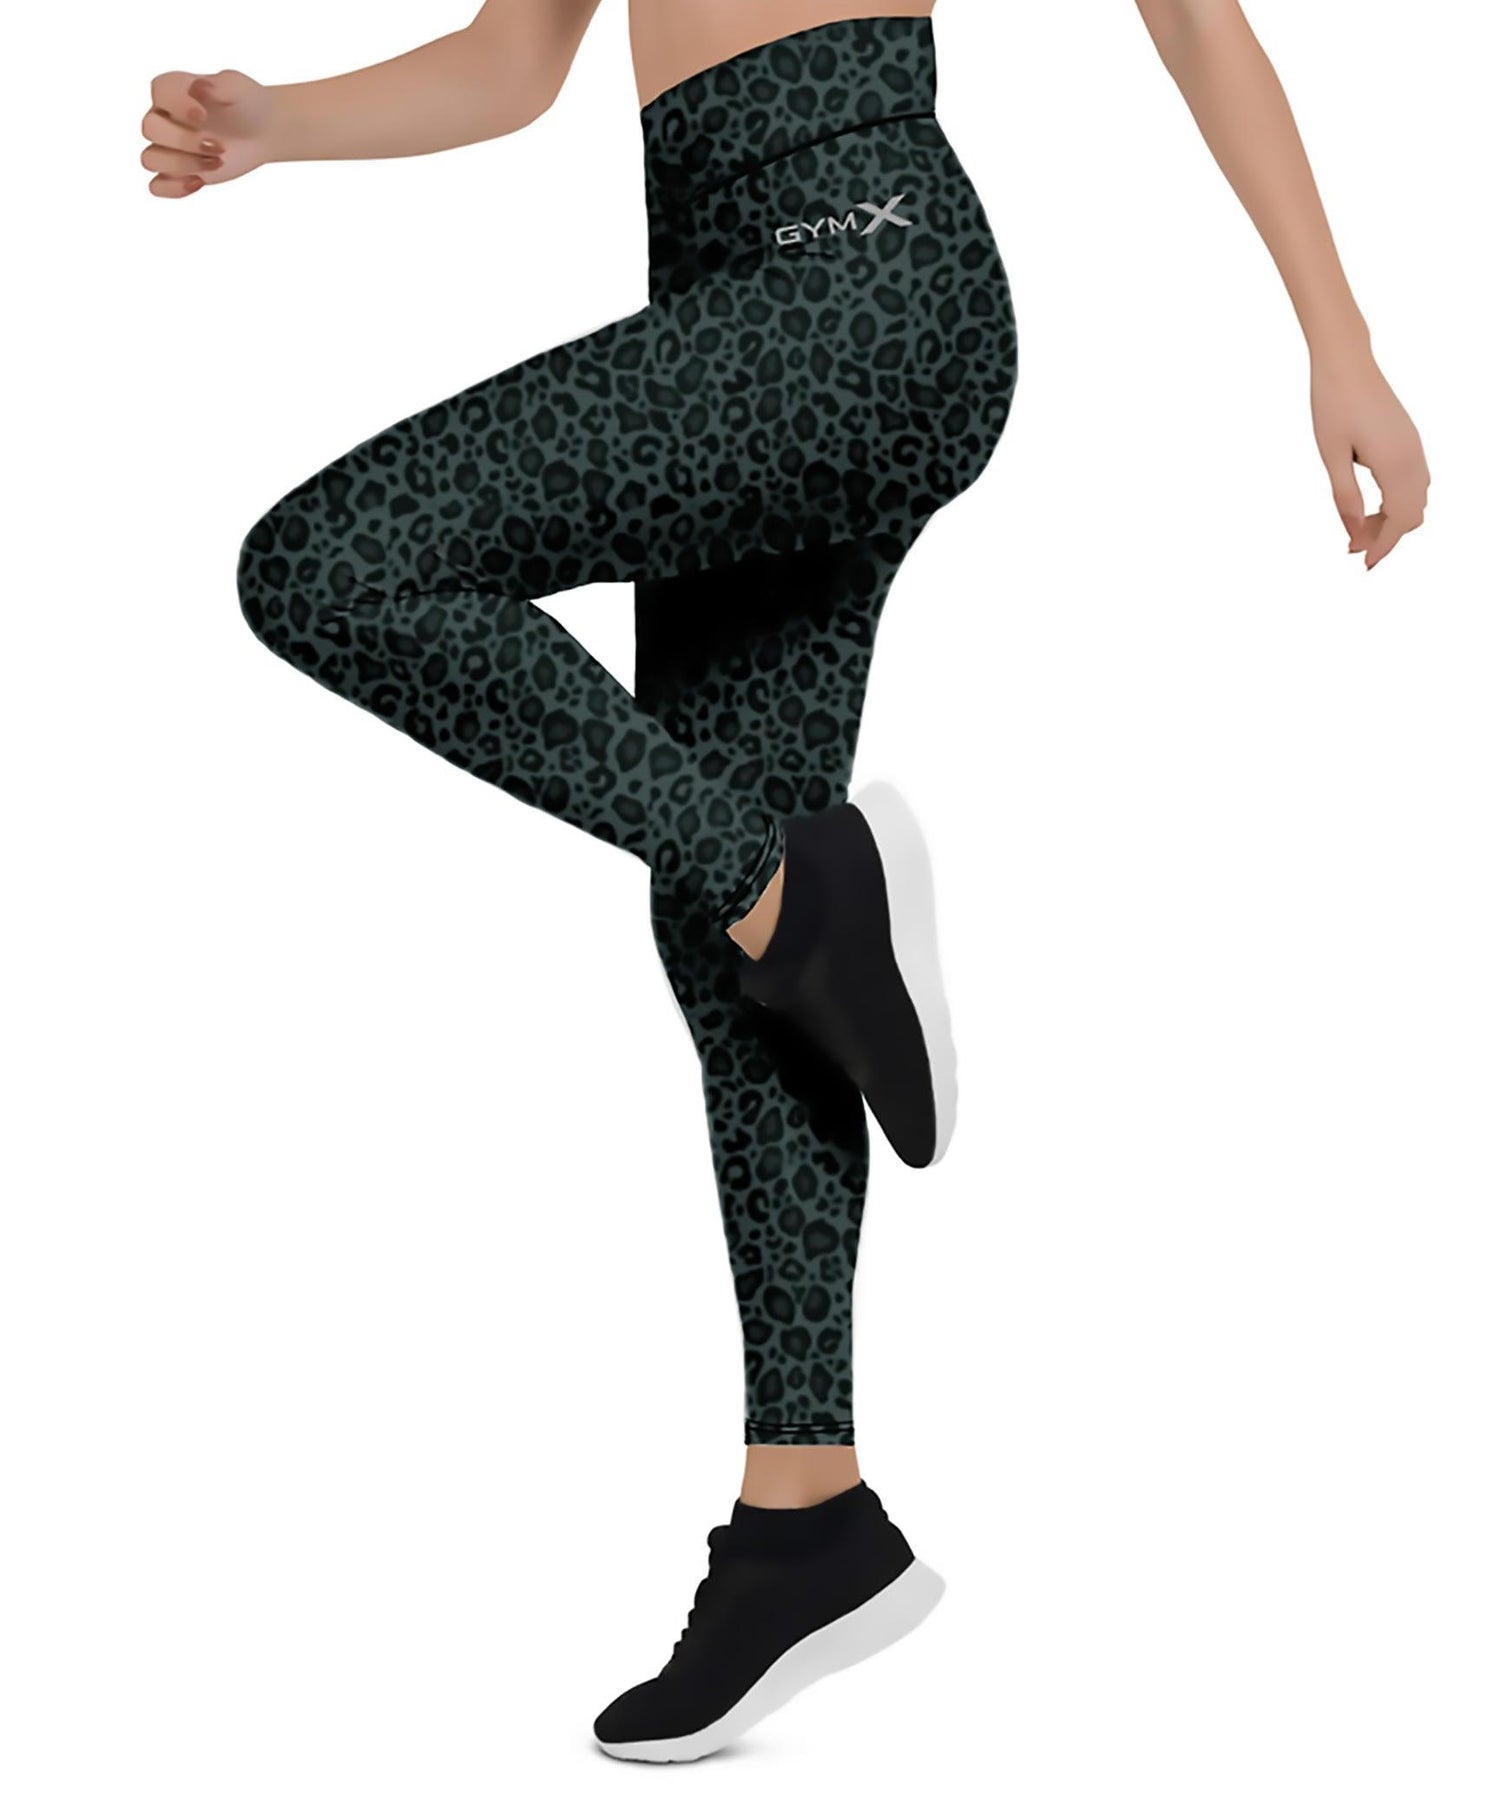 CRZ YOGA Women's Naked Feeling Workout Leggings 25 Inches - 7/8 High Waist  Yoga Tight Pants, Orange Yellow Leopard Print, X-Large : Amazon.in:  Clothing & Accessories